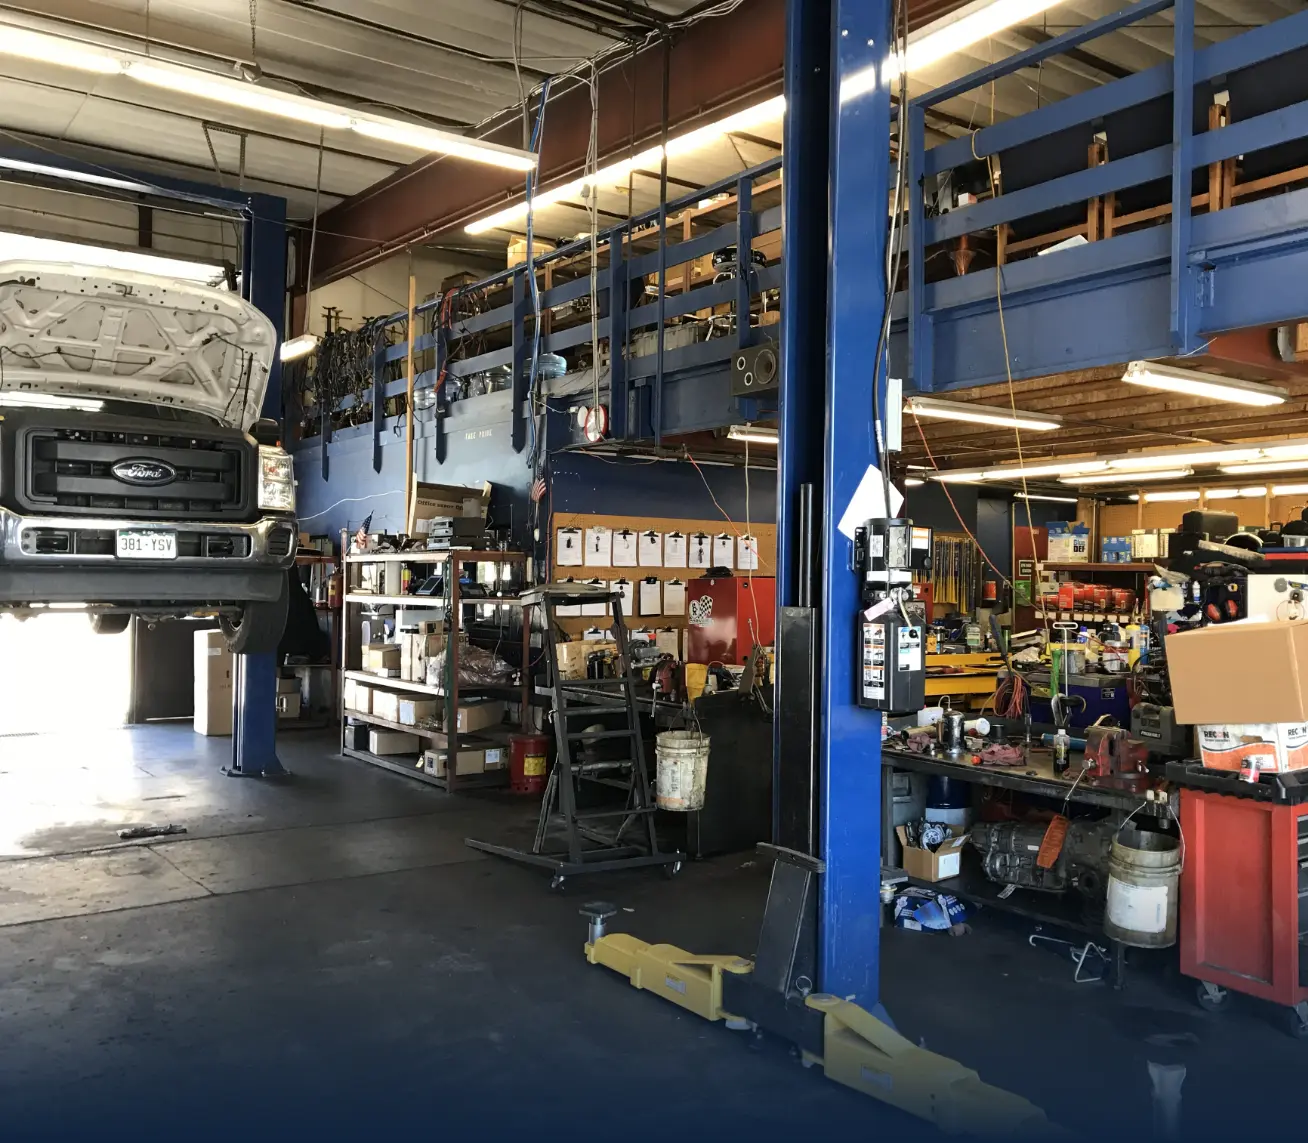 image of inside shop bay area where tools and staff rooms are as well as parts area. There is a white ford truck raised on a lift.